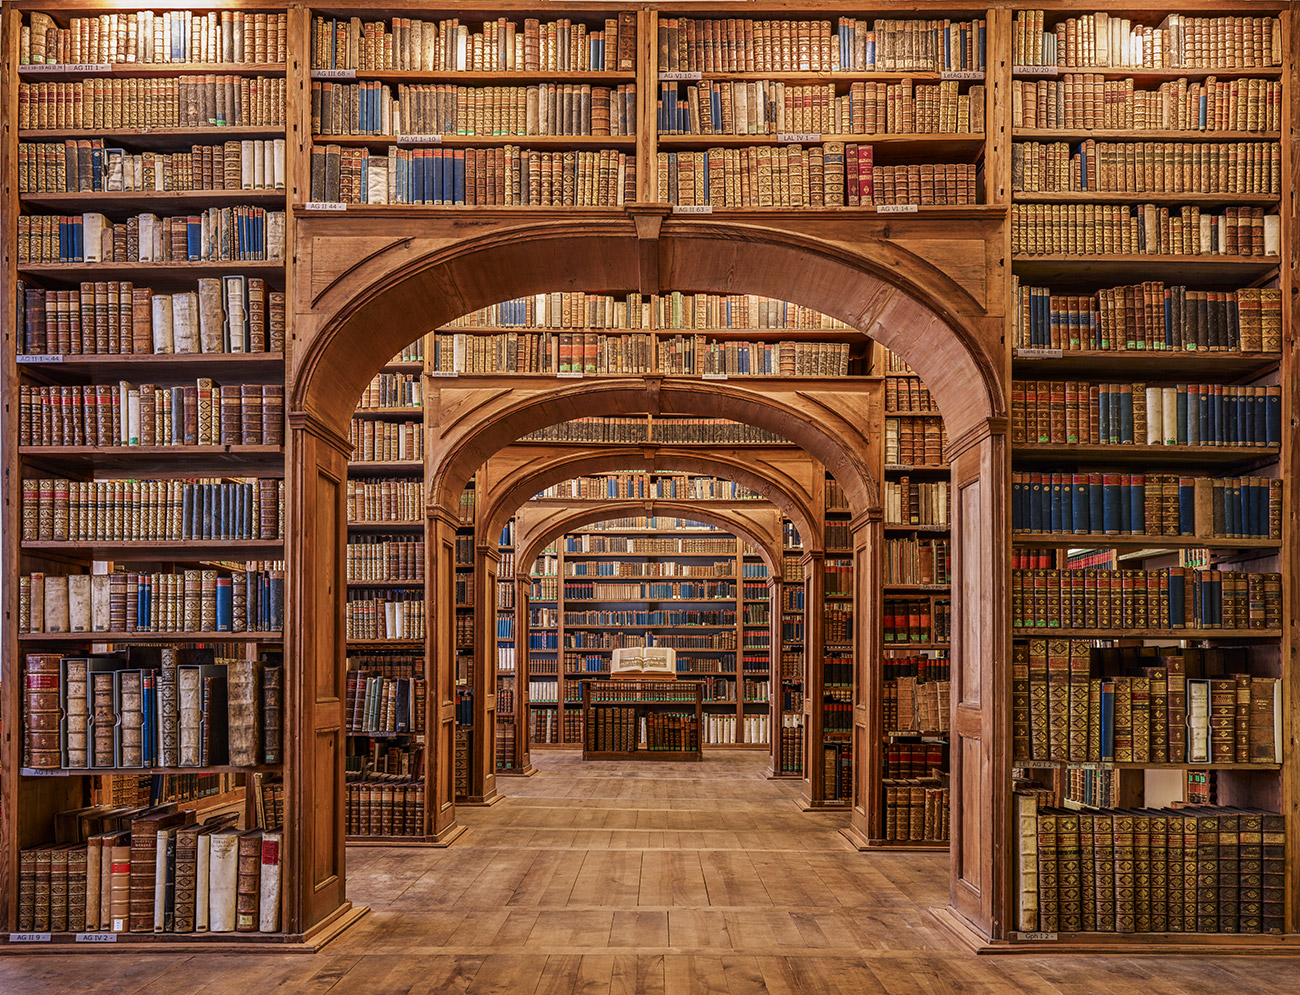 the arches of knowledge